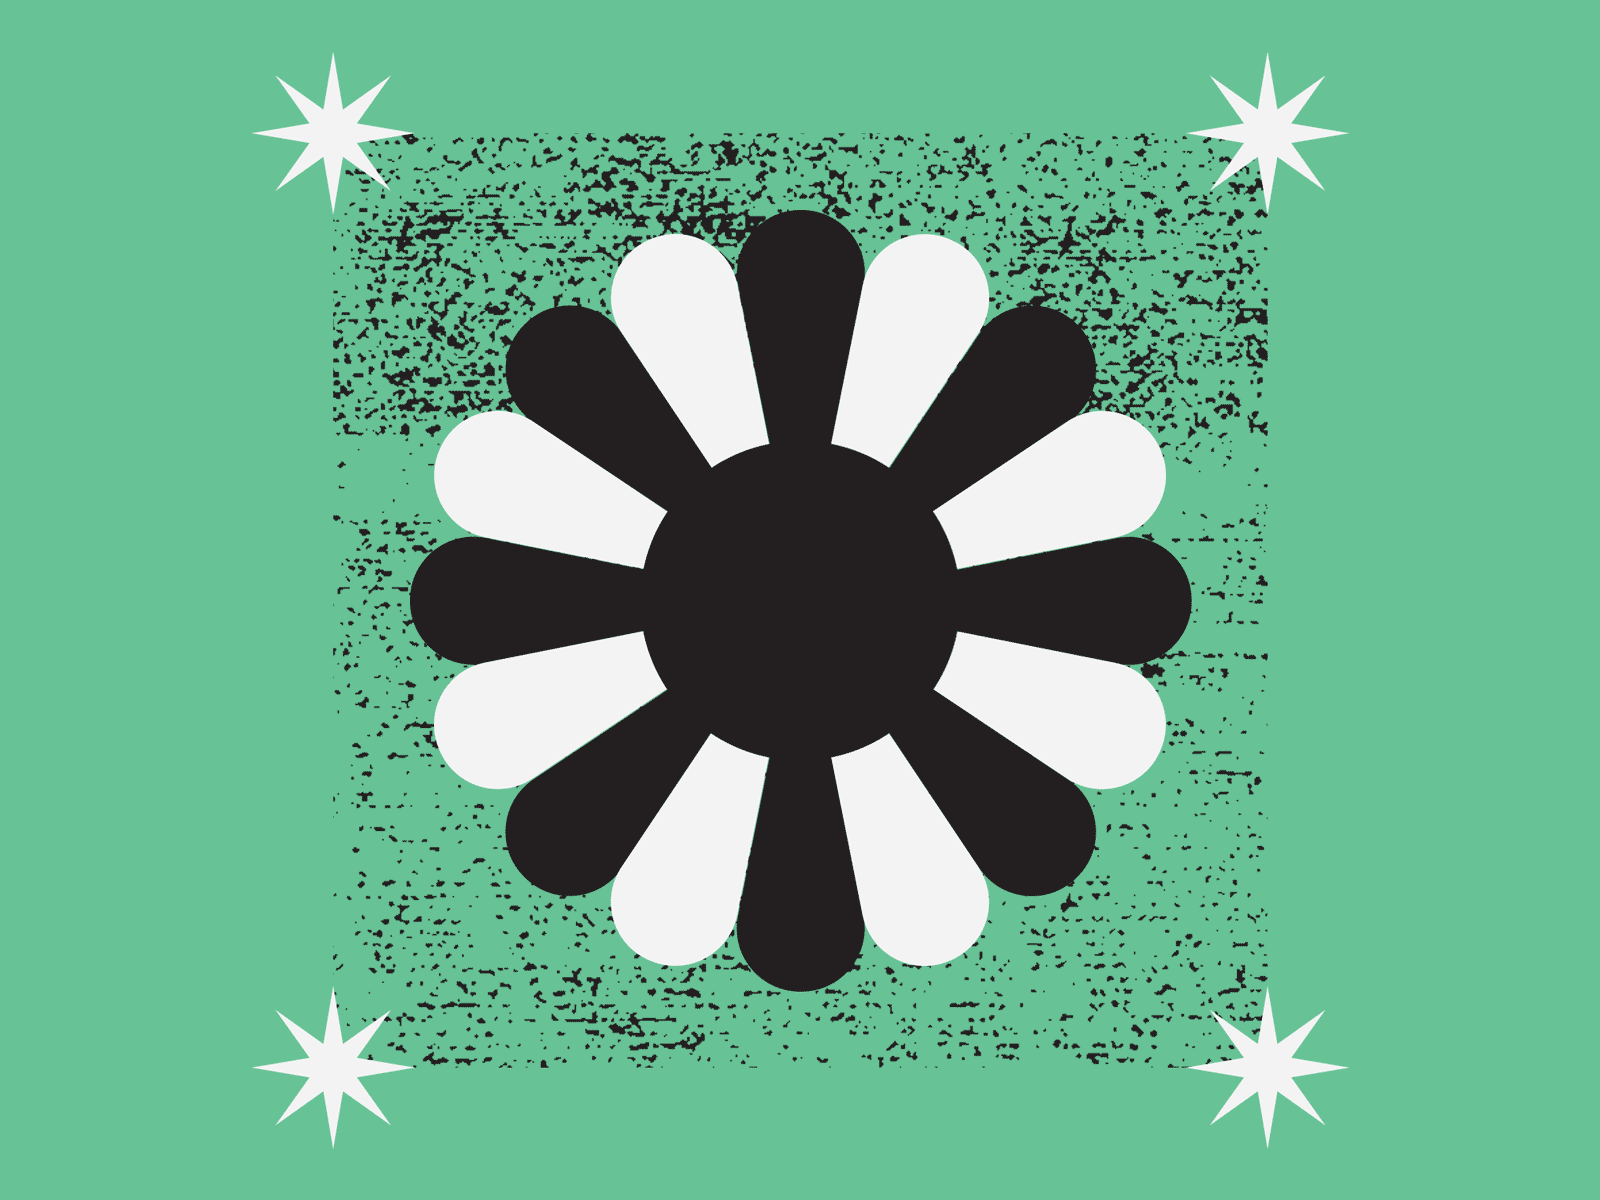 In Bloom distress gif green illustration mograph motion simple star vector